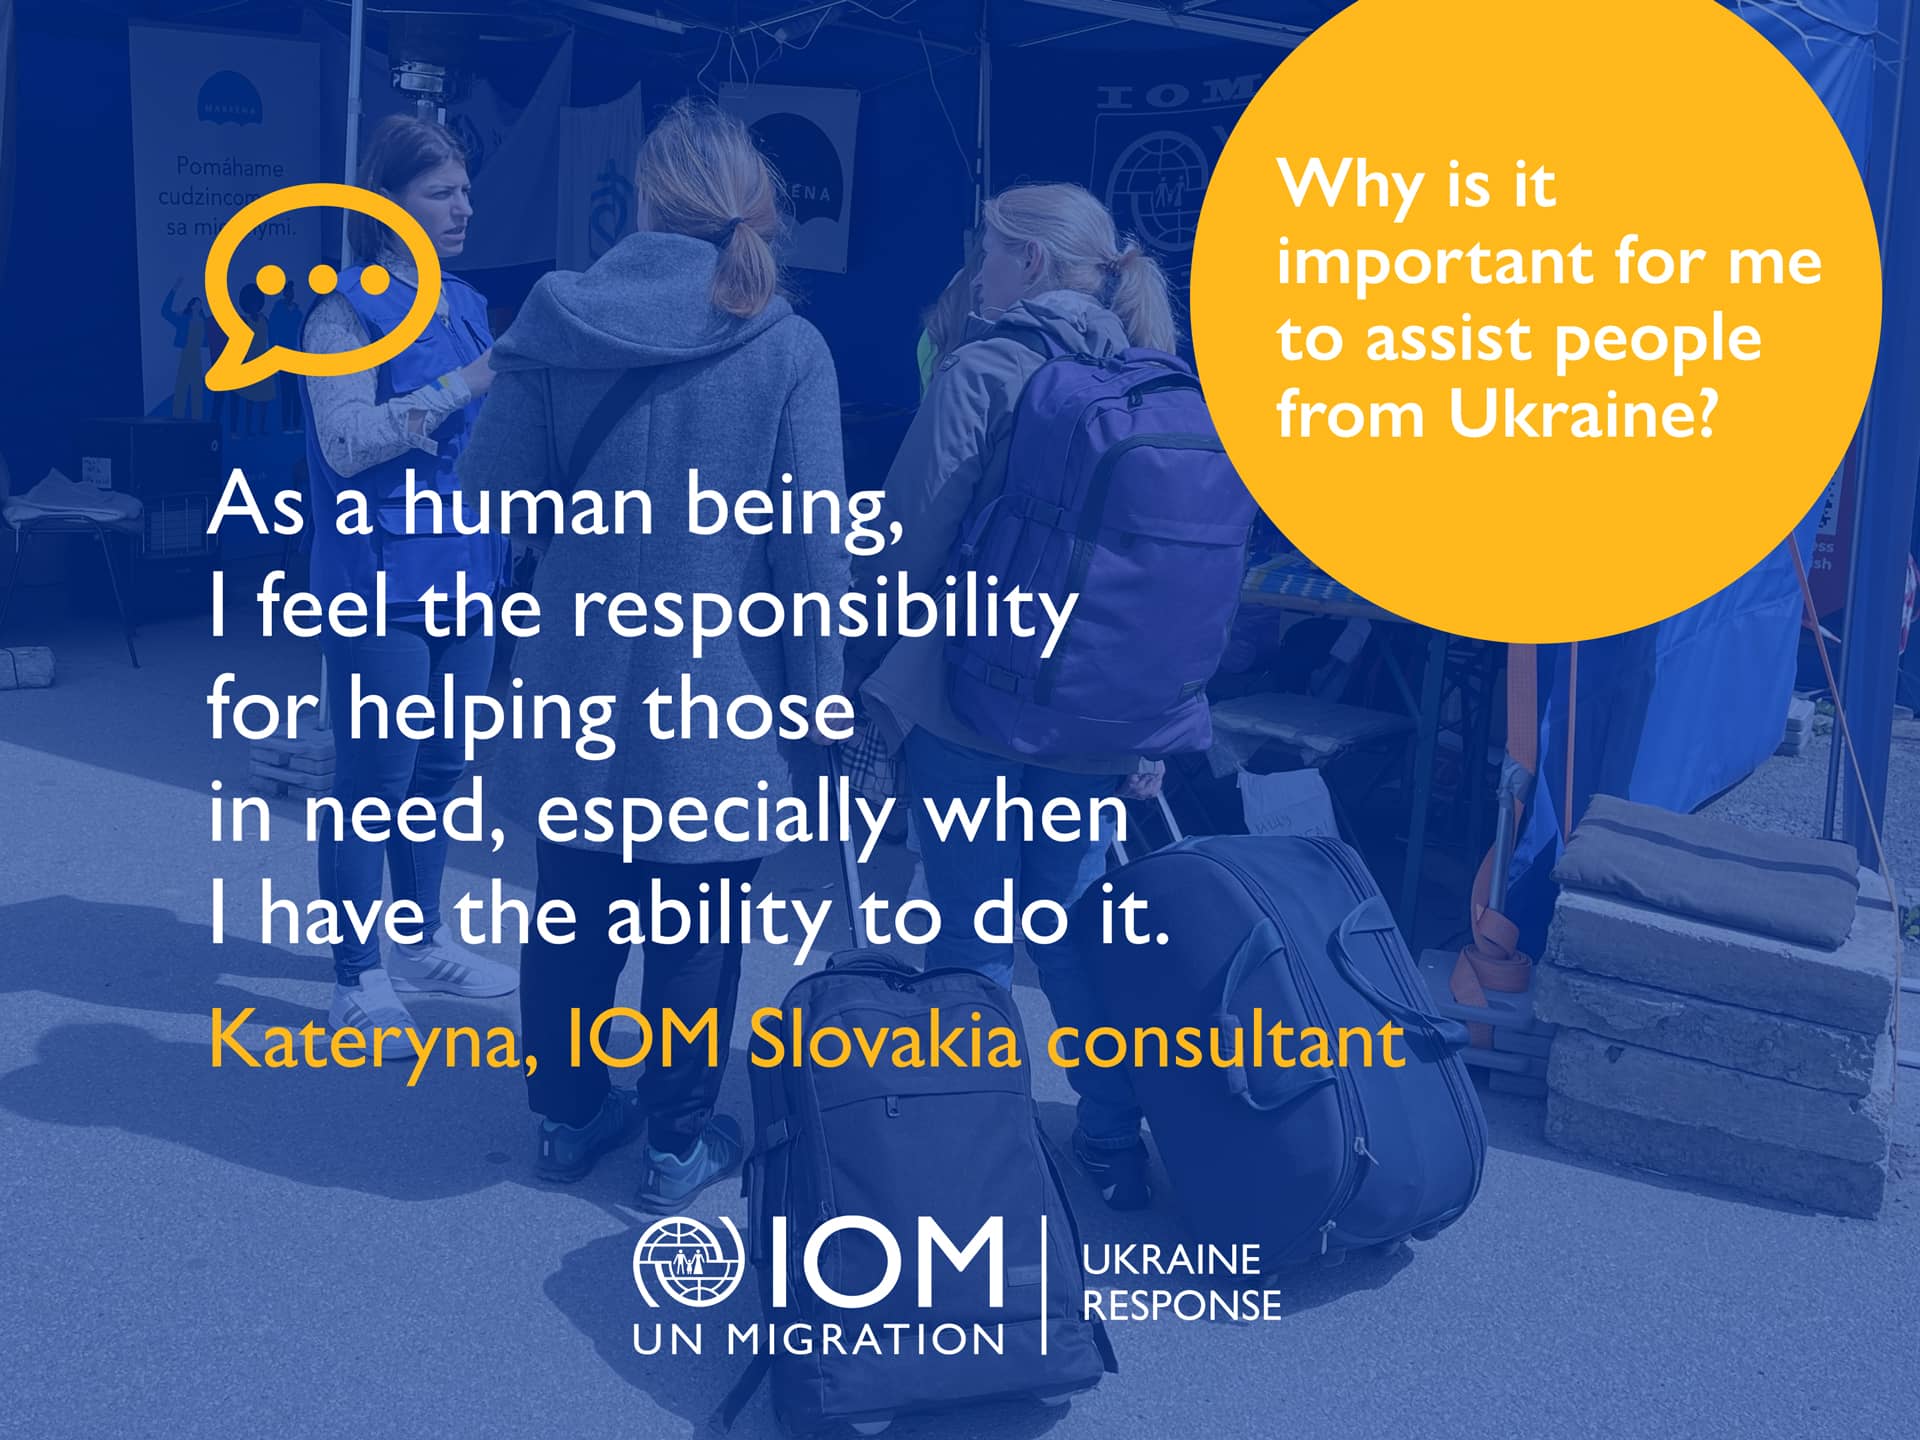 Kateryna, IOM Slovakia consultant - Why it is important for me to assist people from Ukraine